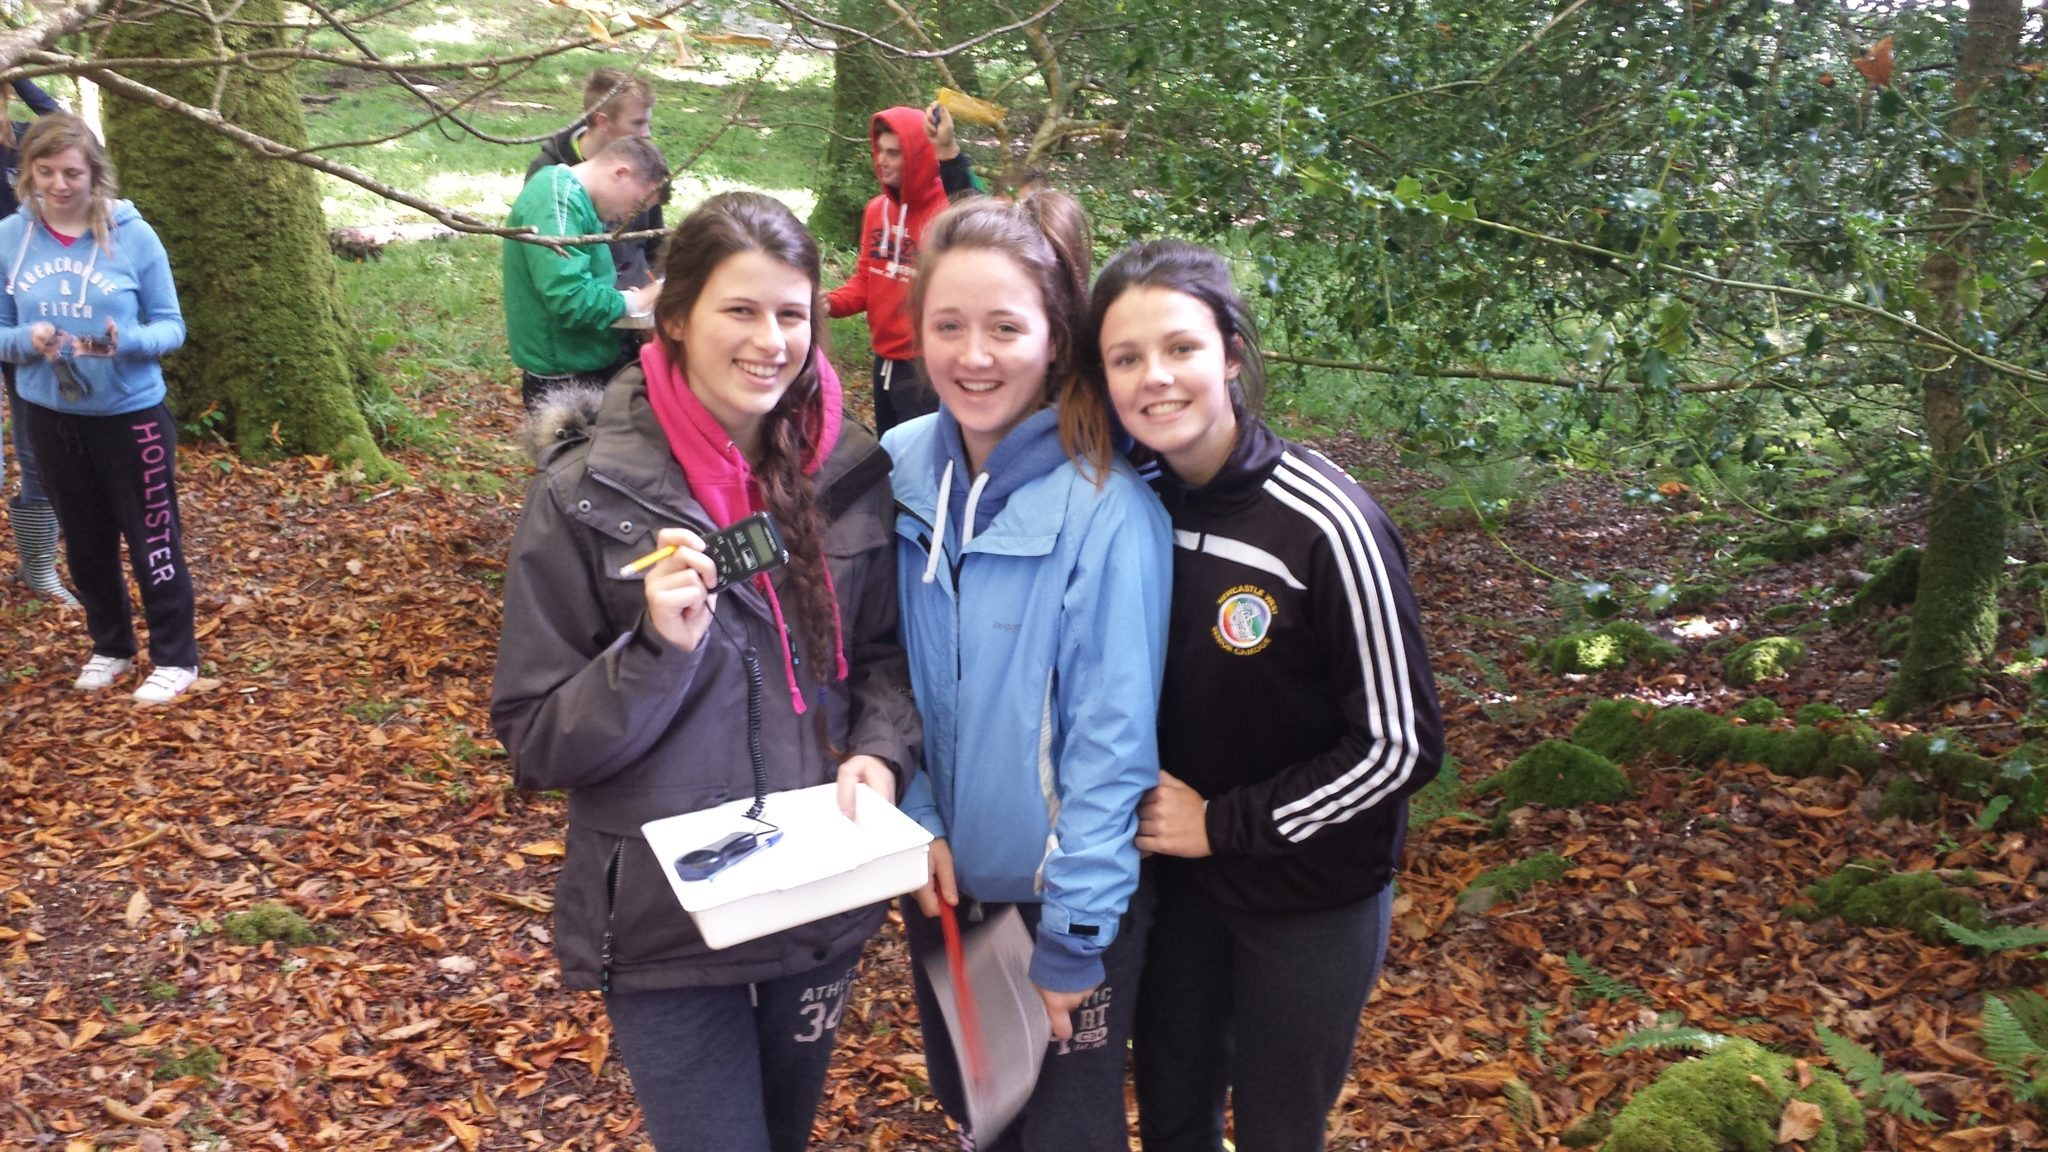 October 2015: Madeline O'Doherty, Rachel Dore, and Leah Kelly explore the flora and fauna at Killarney National Park.